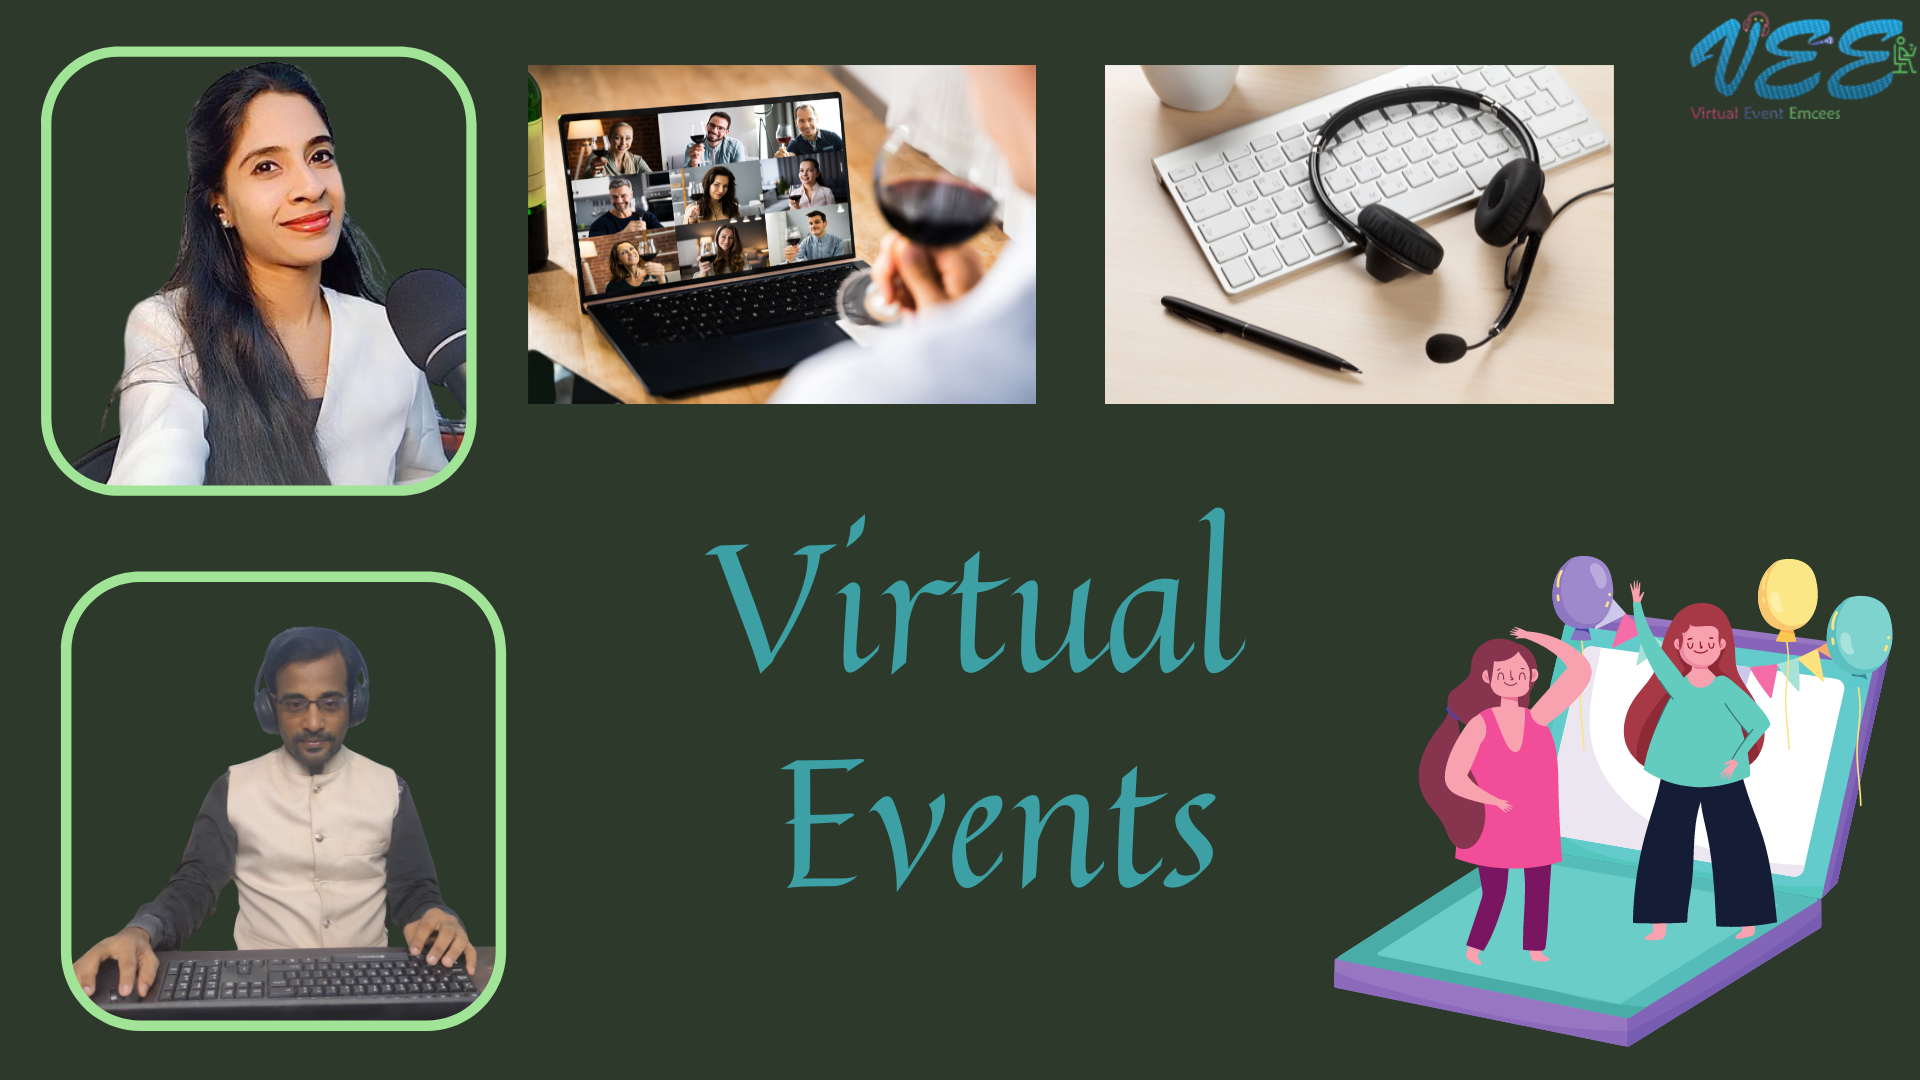 Event Plan for Virtual Events